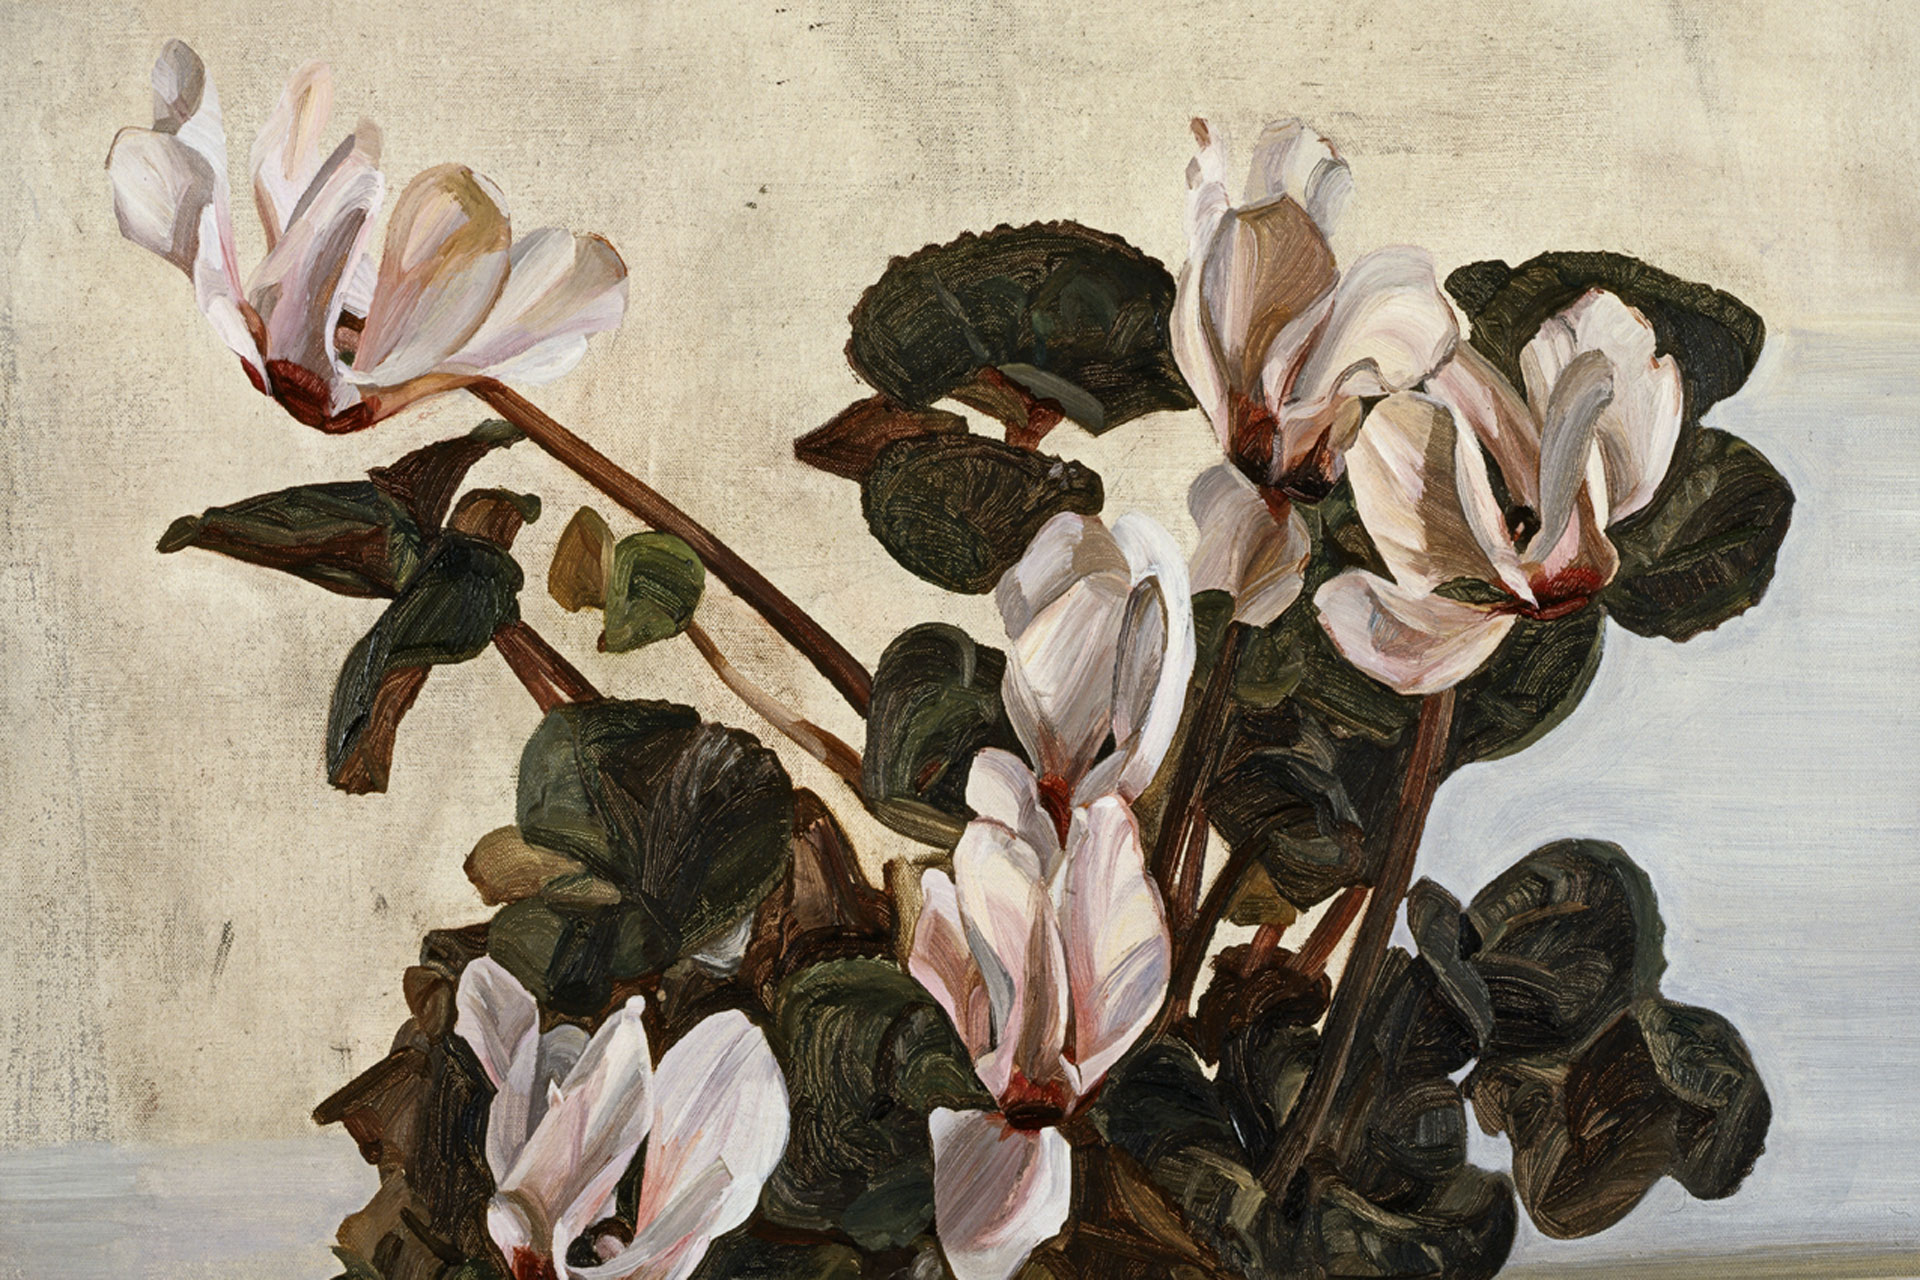 Lucian Freud's Plants Bloom in New Exhibition 'Plant Portraits'